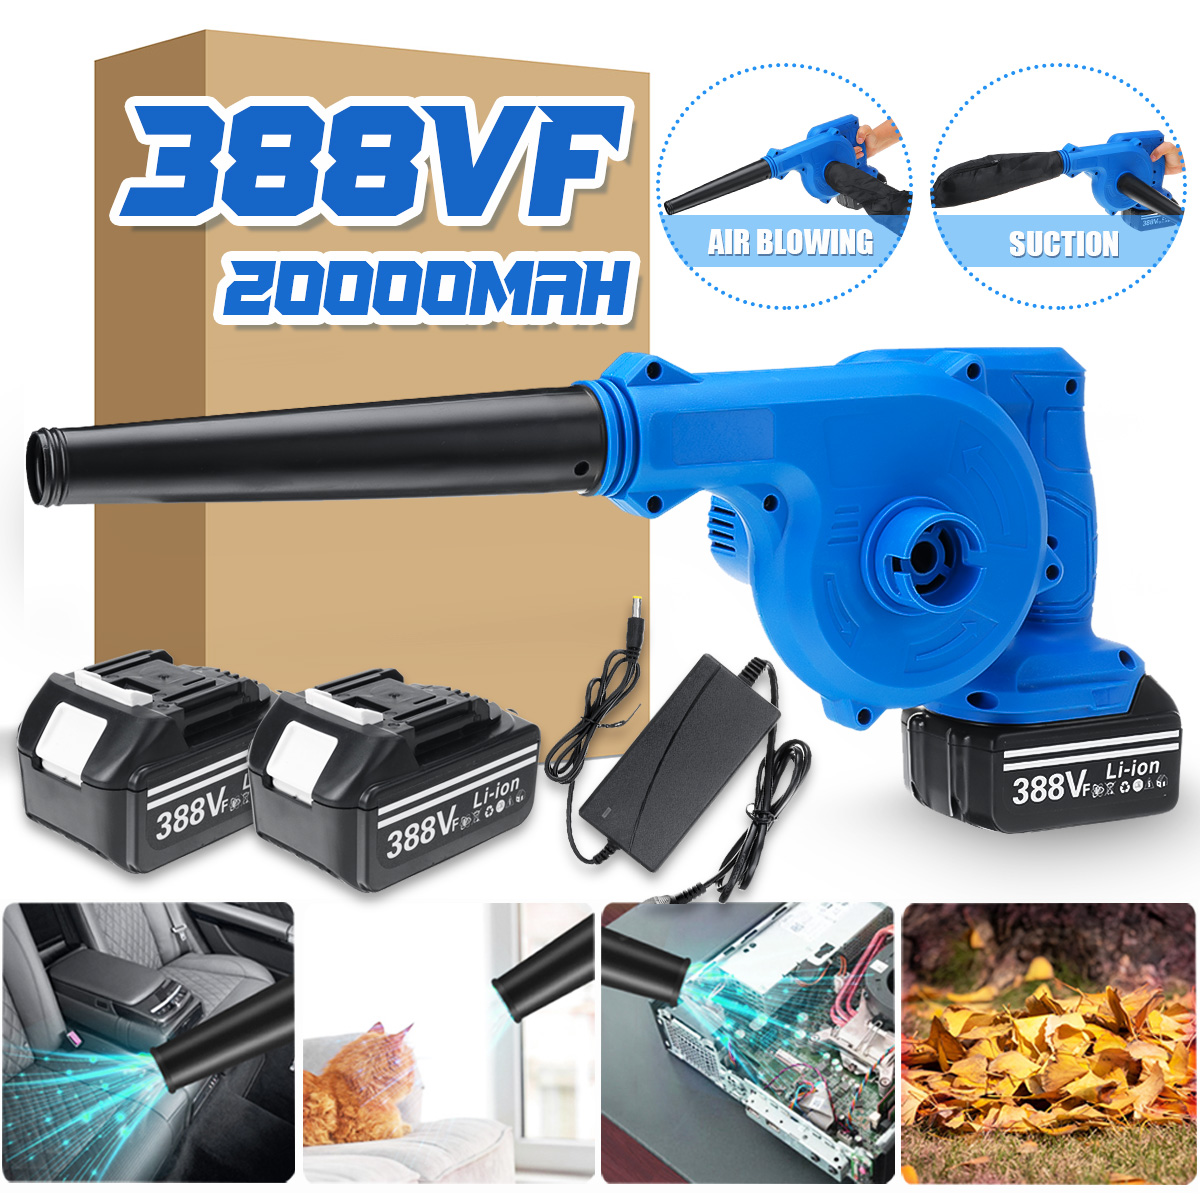 2-IN-1-1000W-Cordless-Electric-Air-Blower--Suction-Handheld-Leaf-Computer-Dust-Collector-Cleaner-Pow-1868157-3